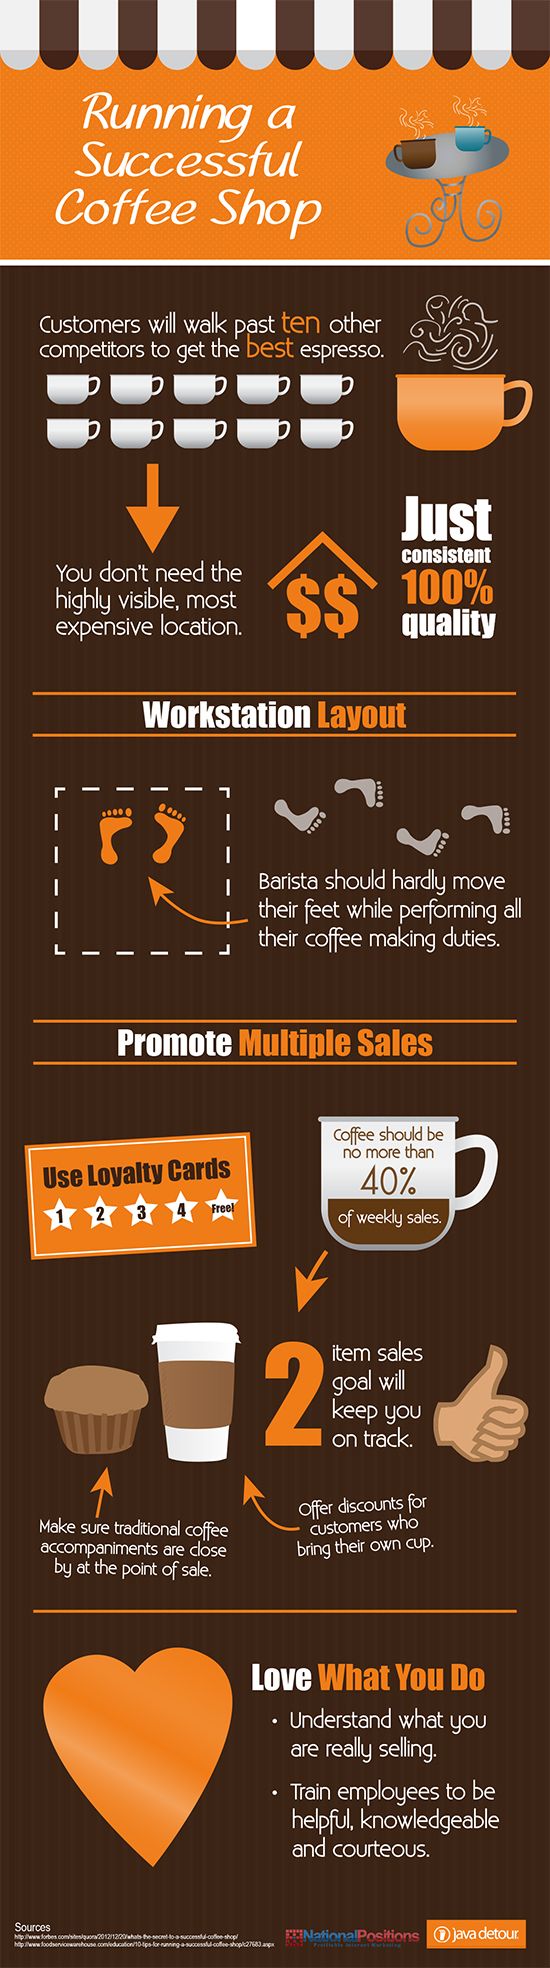 Running a Successful Coffee Shop infographic